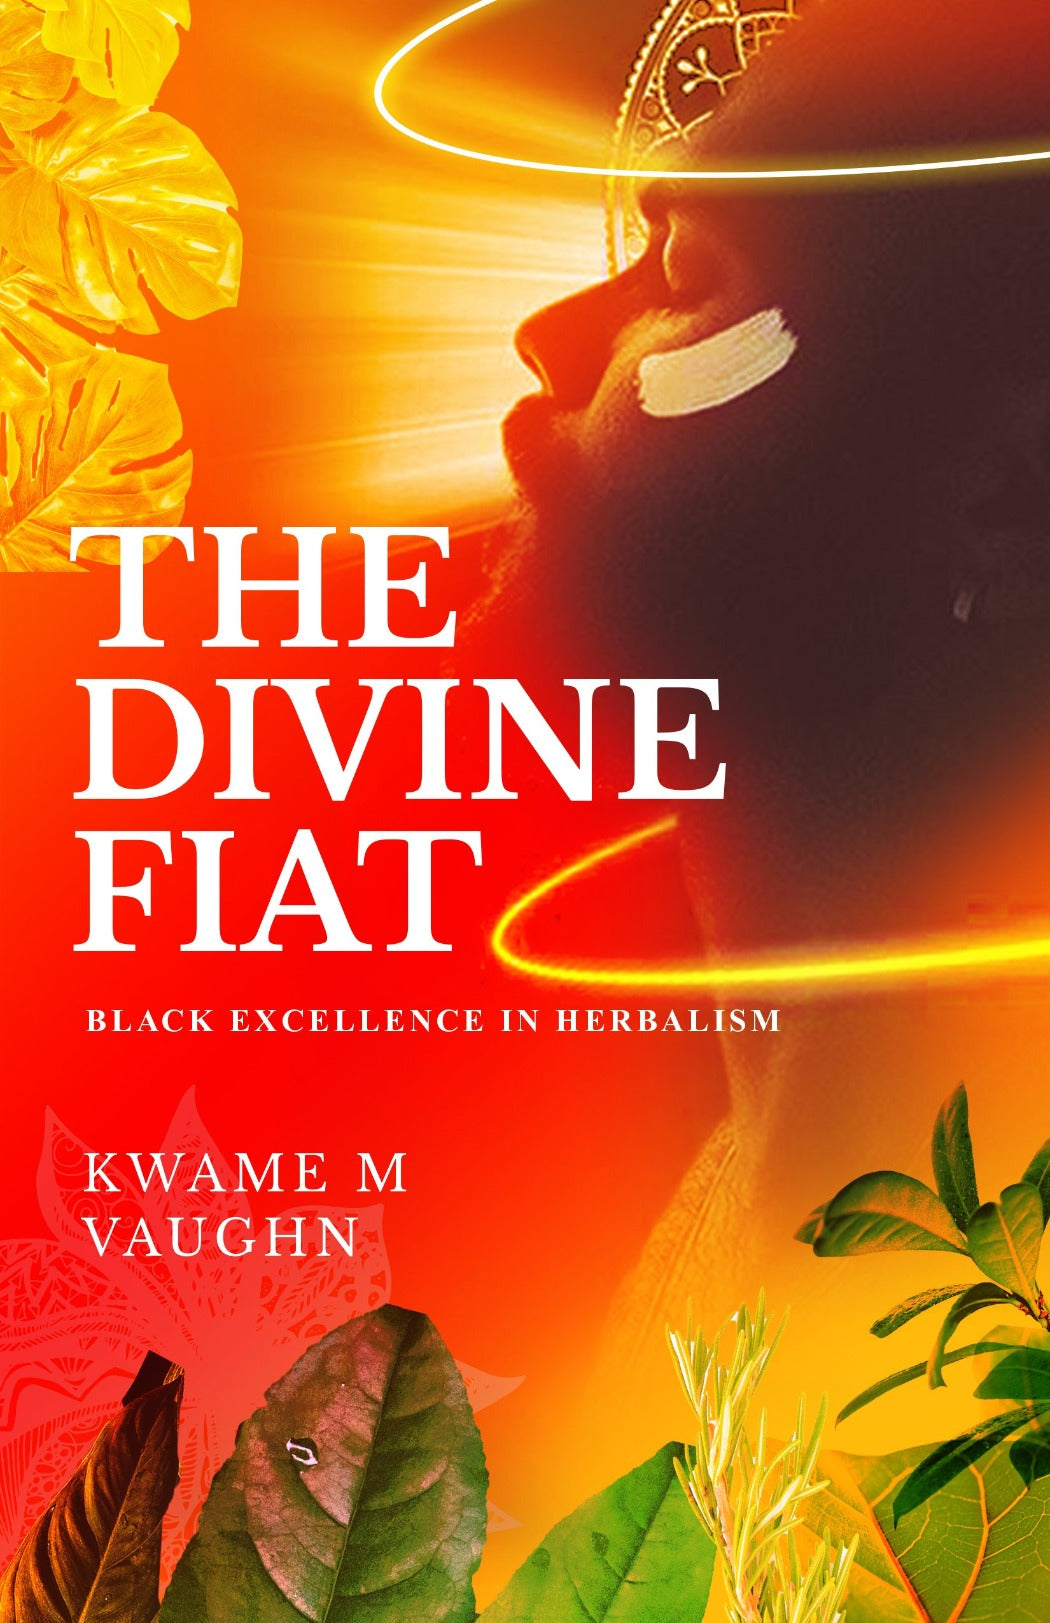 The Divine Fiat: Black Excellence in Herbalism